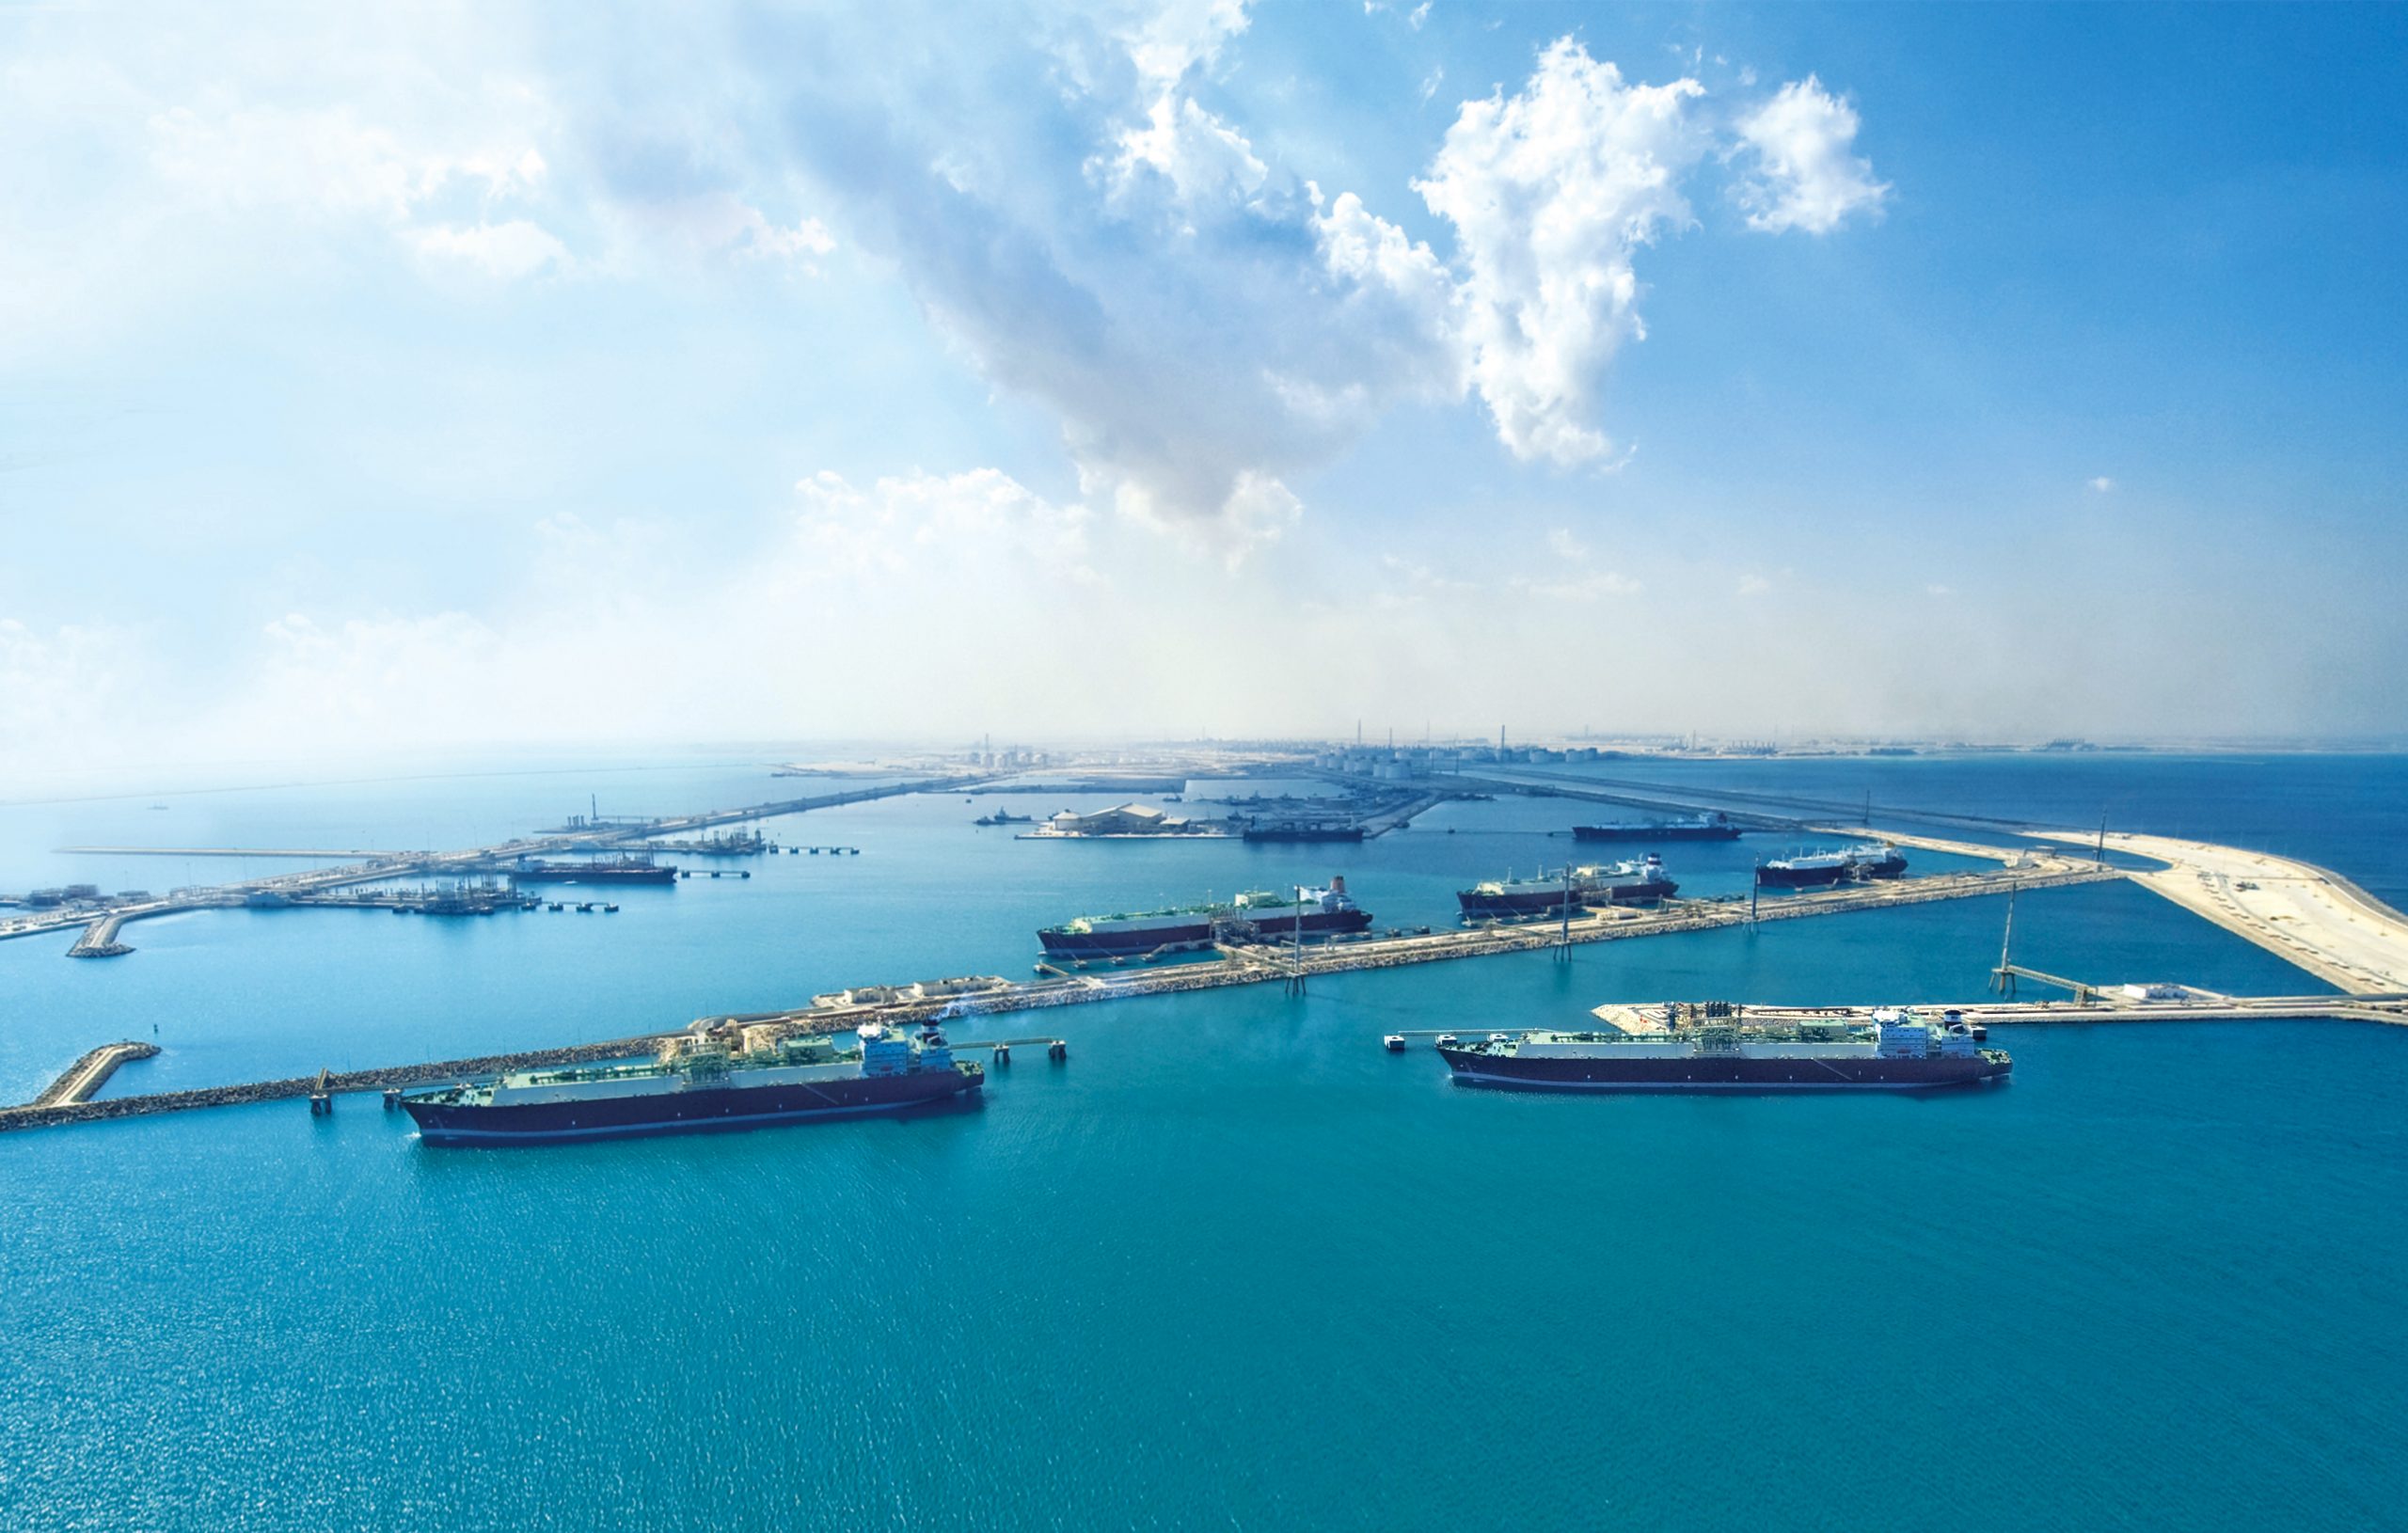 Qatargas managed to process over 10,000 tonnes of sulfur per day